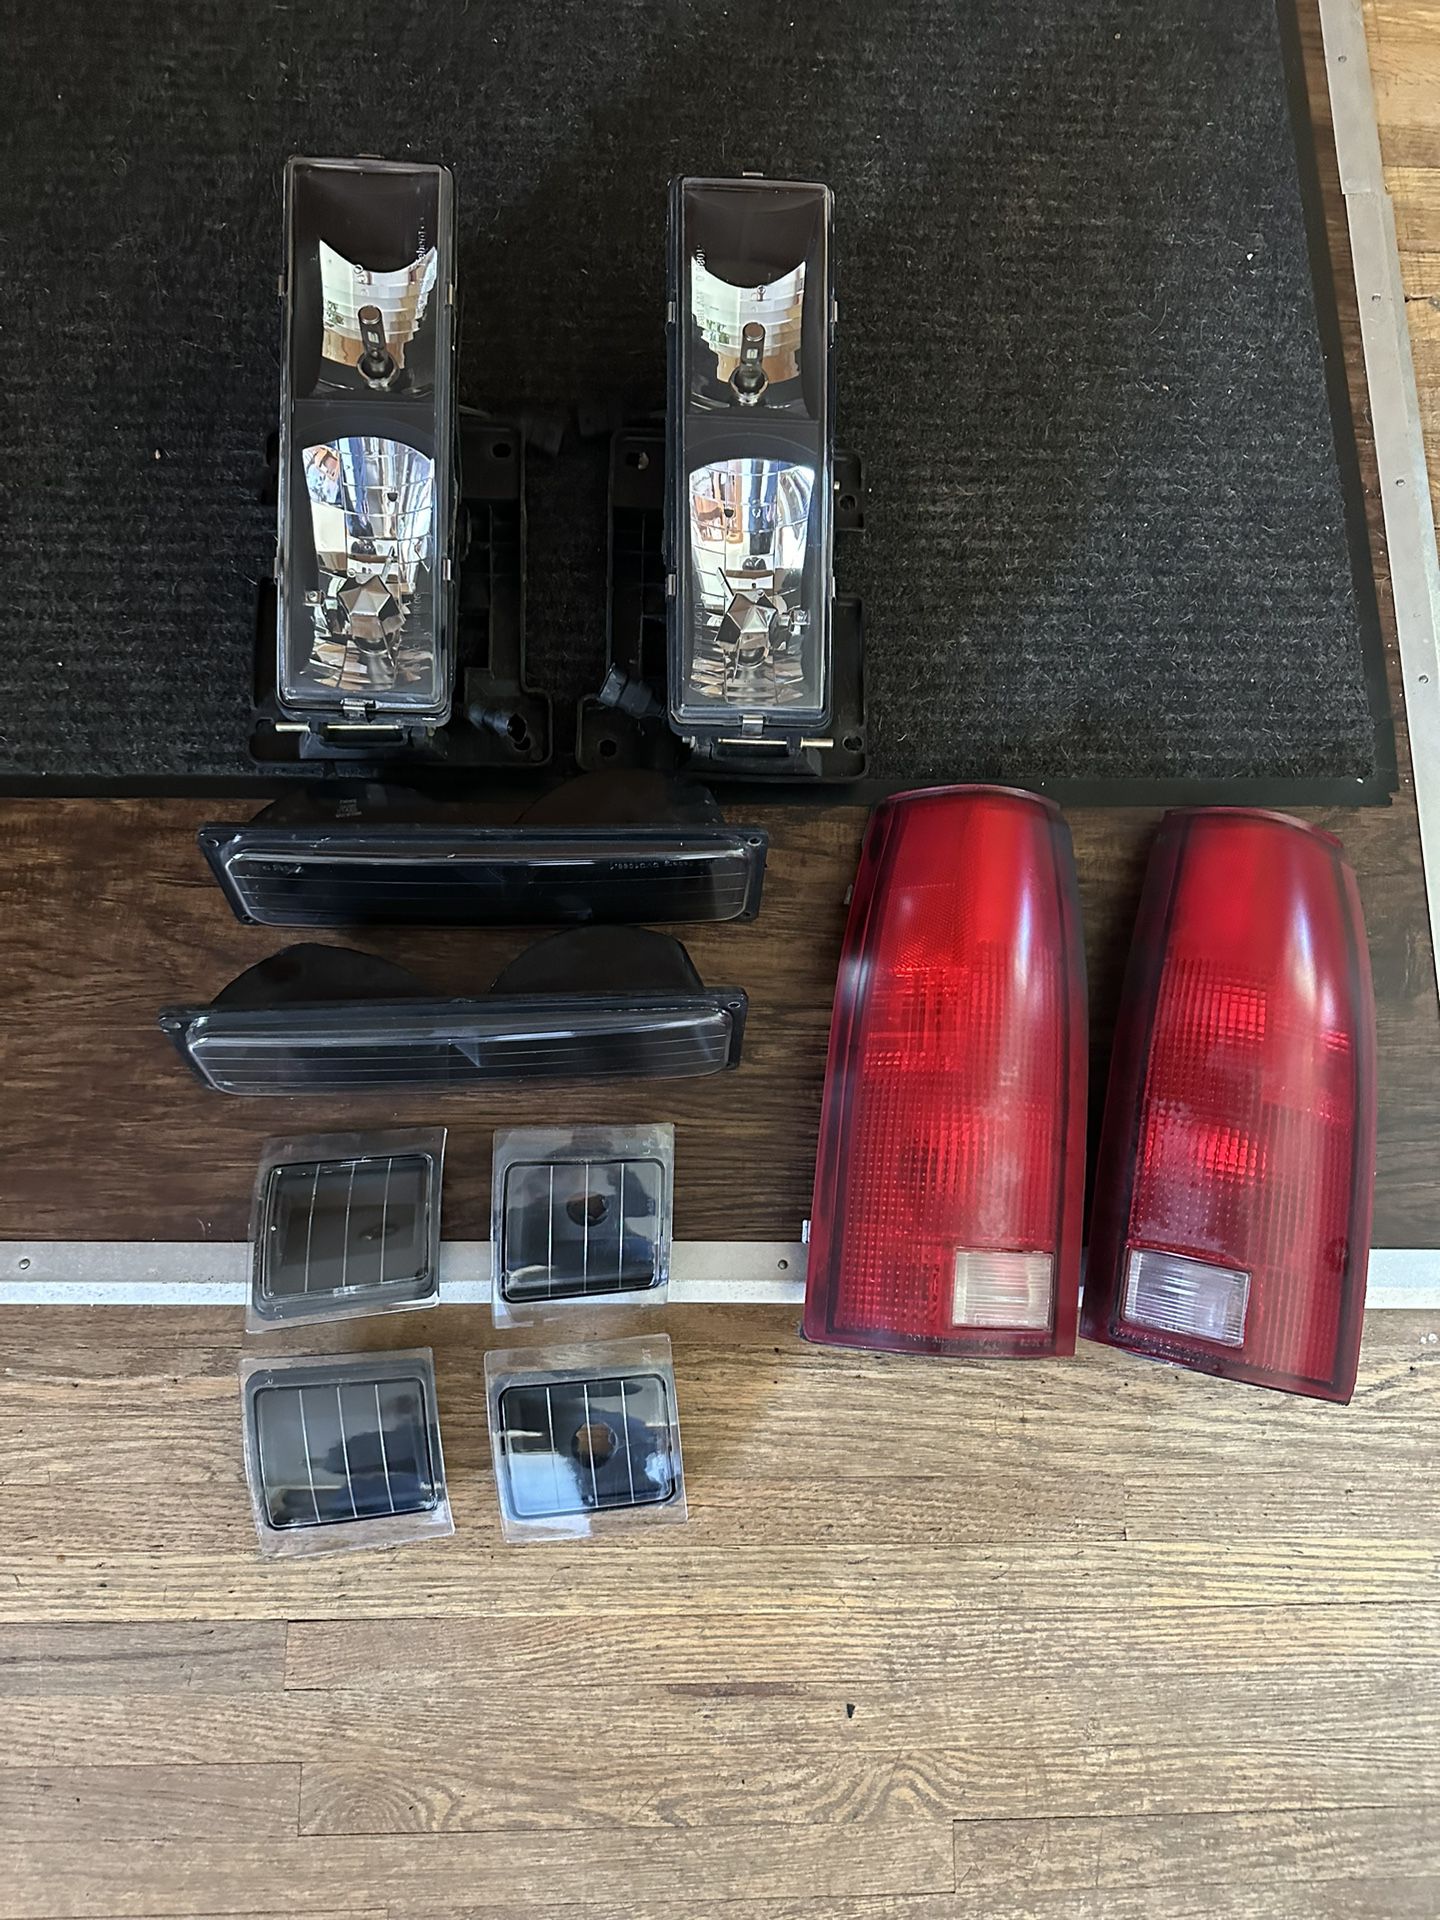 88-98 Chevy LED Lights